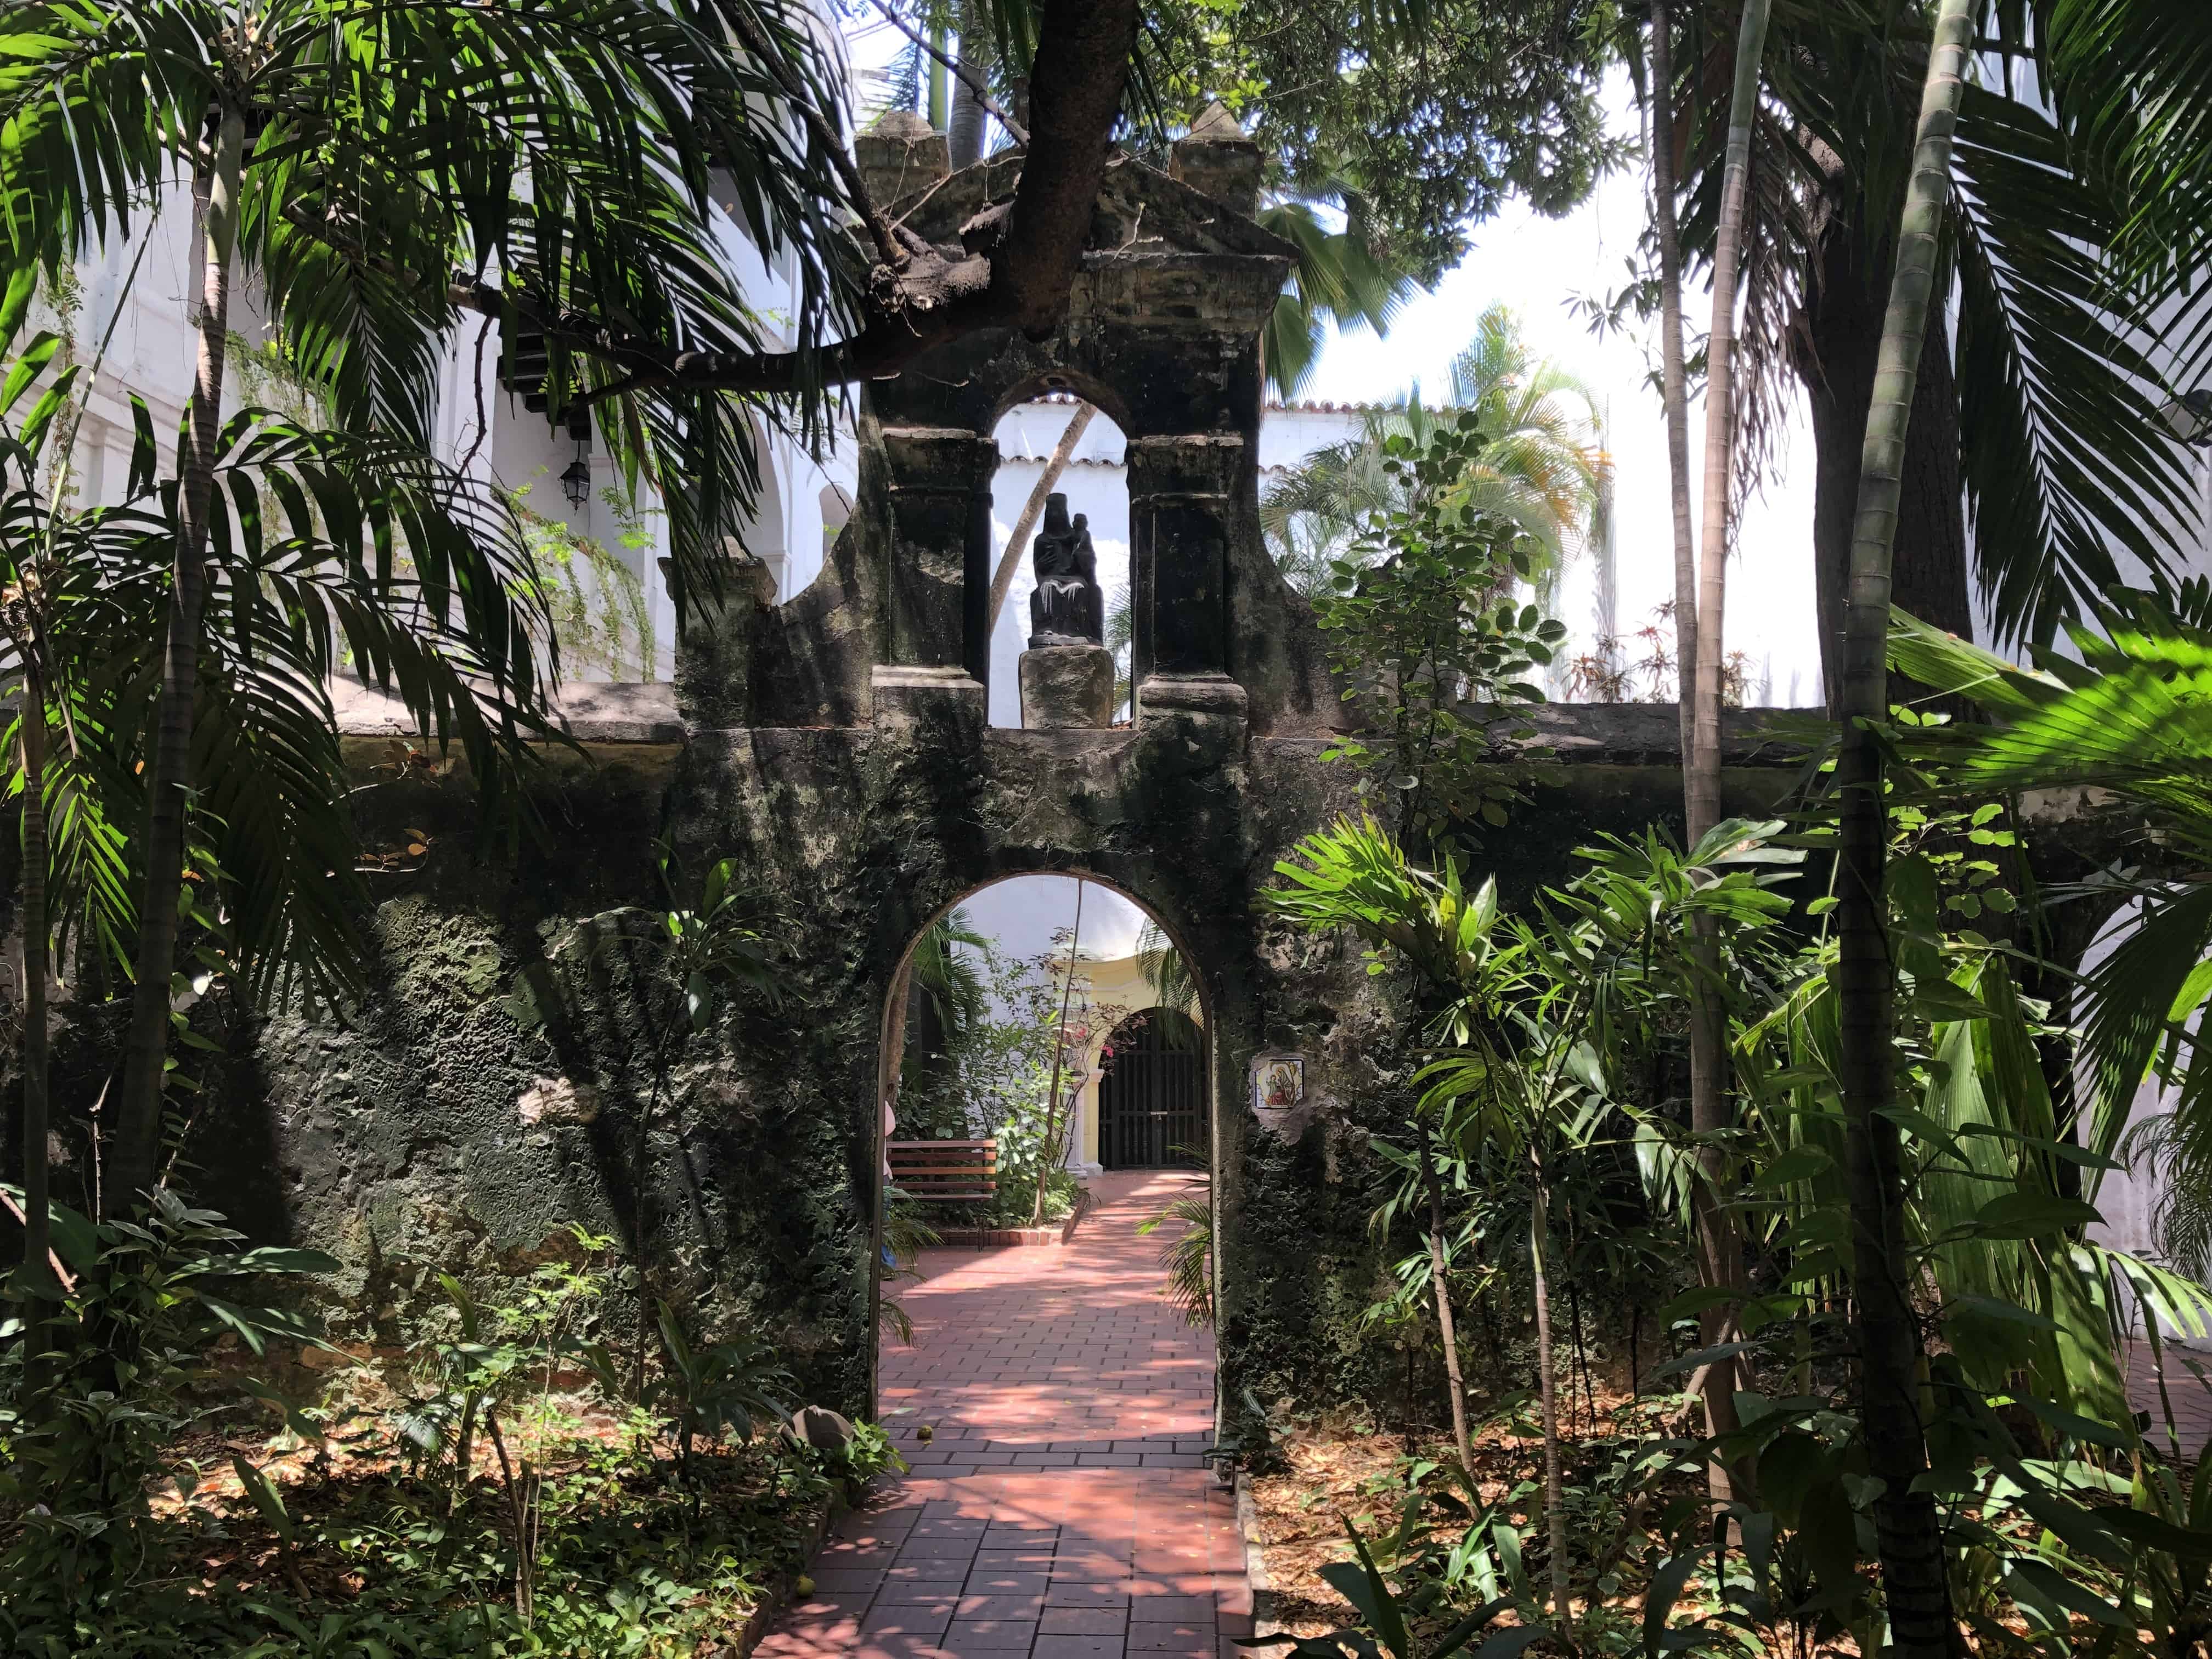 Entrance to the cistern at the Sanctuary of San Pedro Claver Museum in Cartagena, Colombia